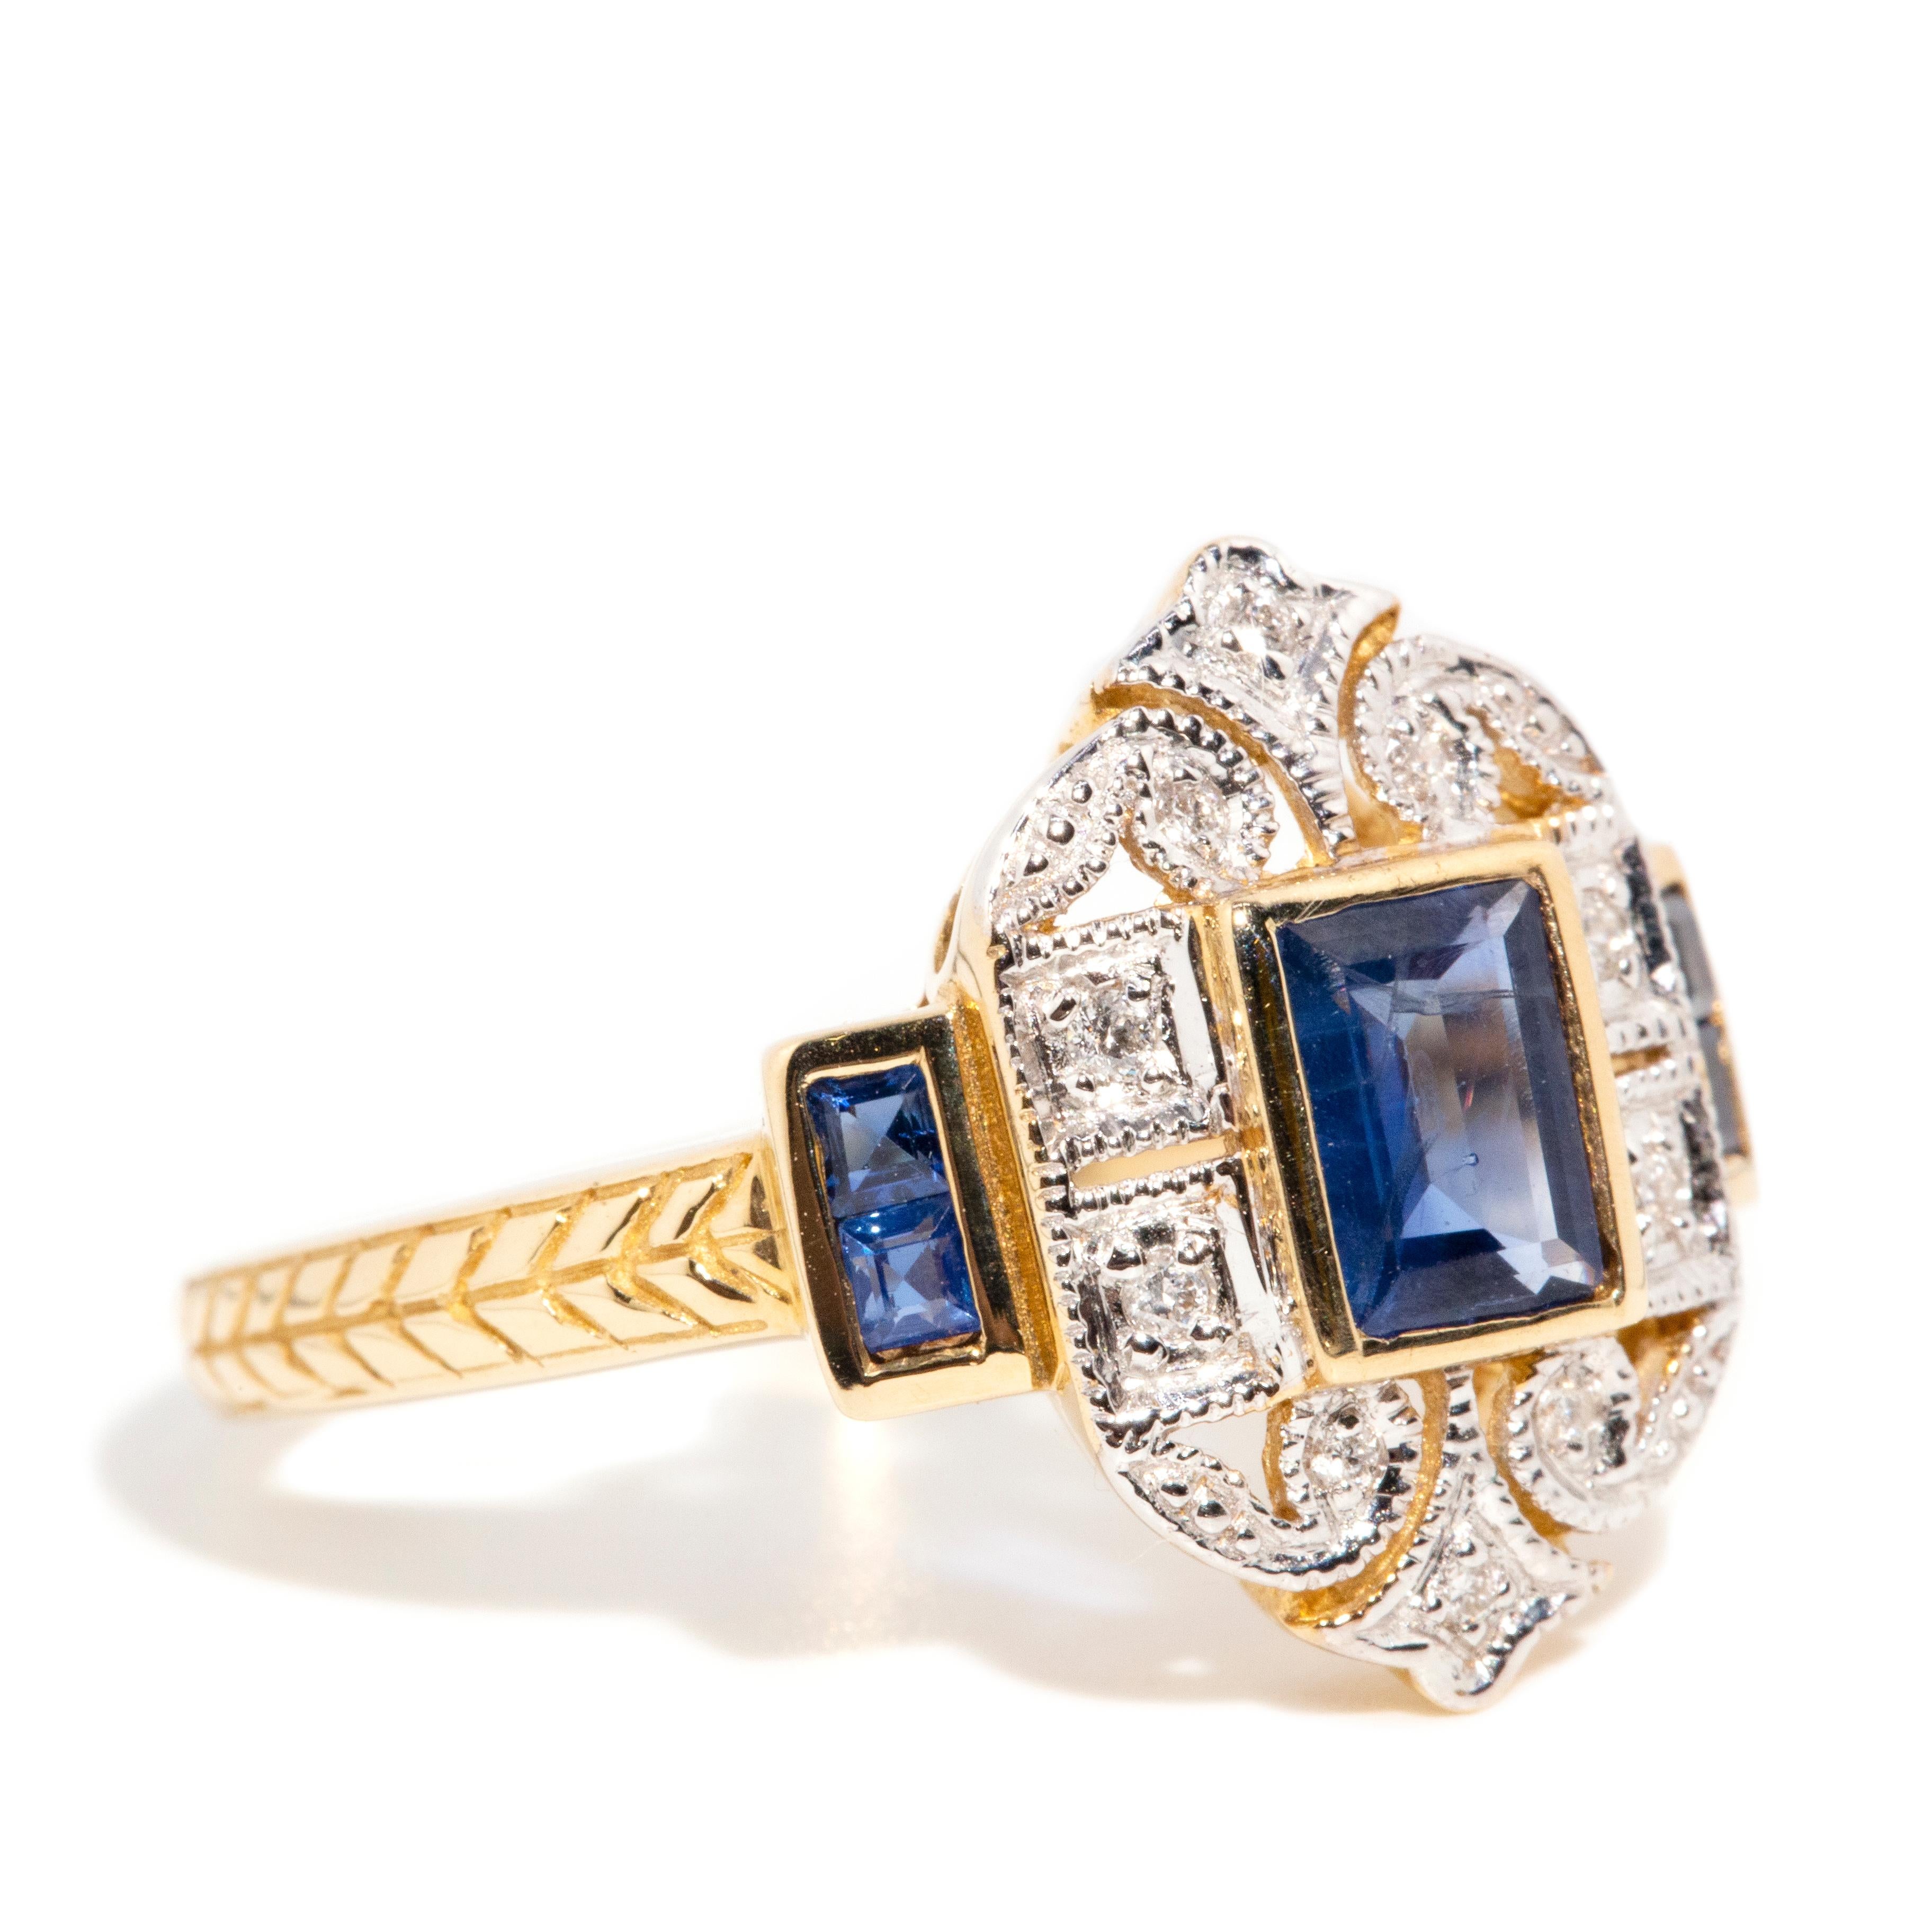 Contemporary Vintage Inspired Deep Blue Baguette Sapphire & Diamond Ring 9 Carat Yellow Gold For Sale